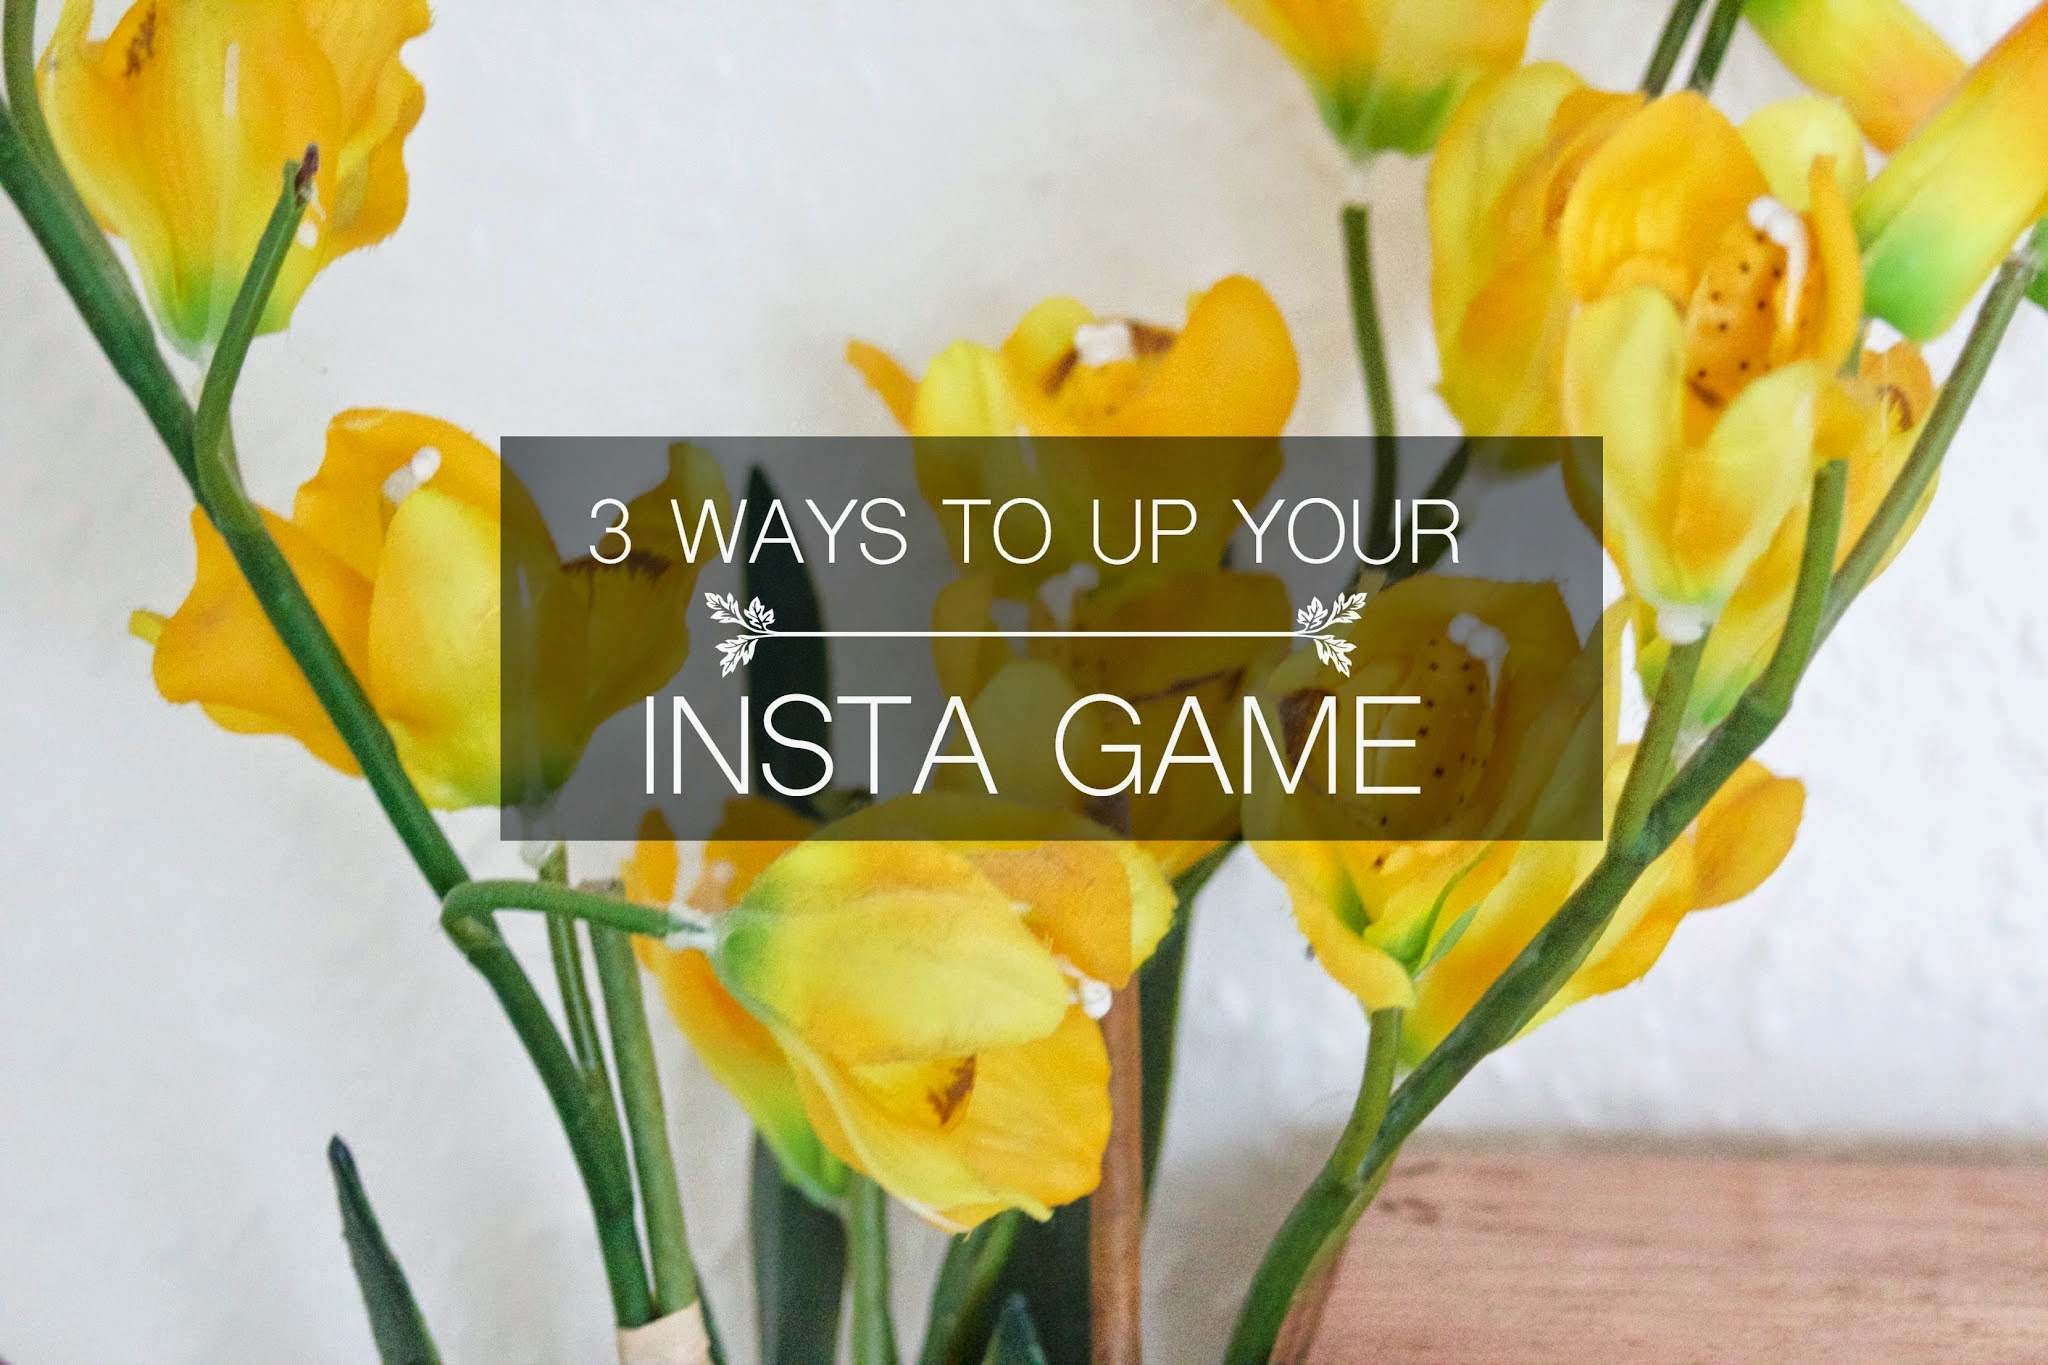 3 Simple Ways to Up Your Instagram Game